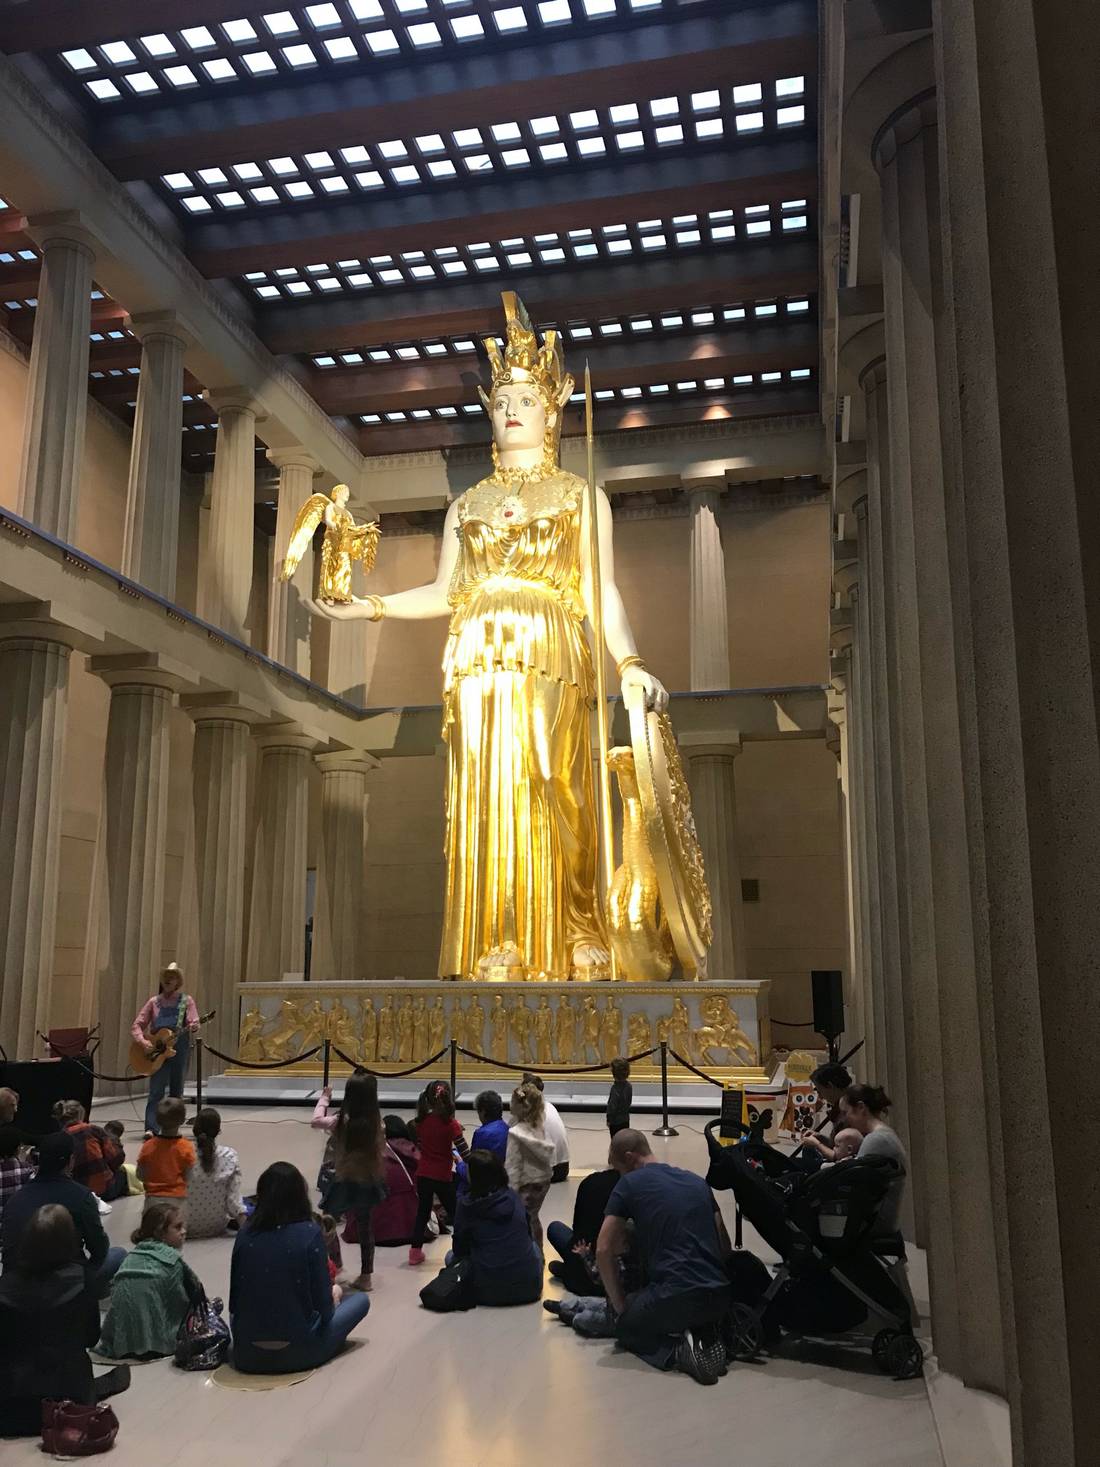 The Statue of Athena